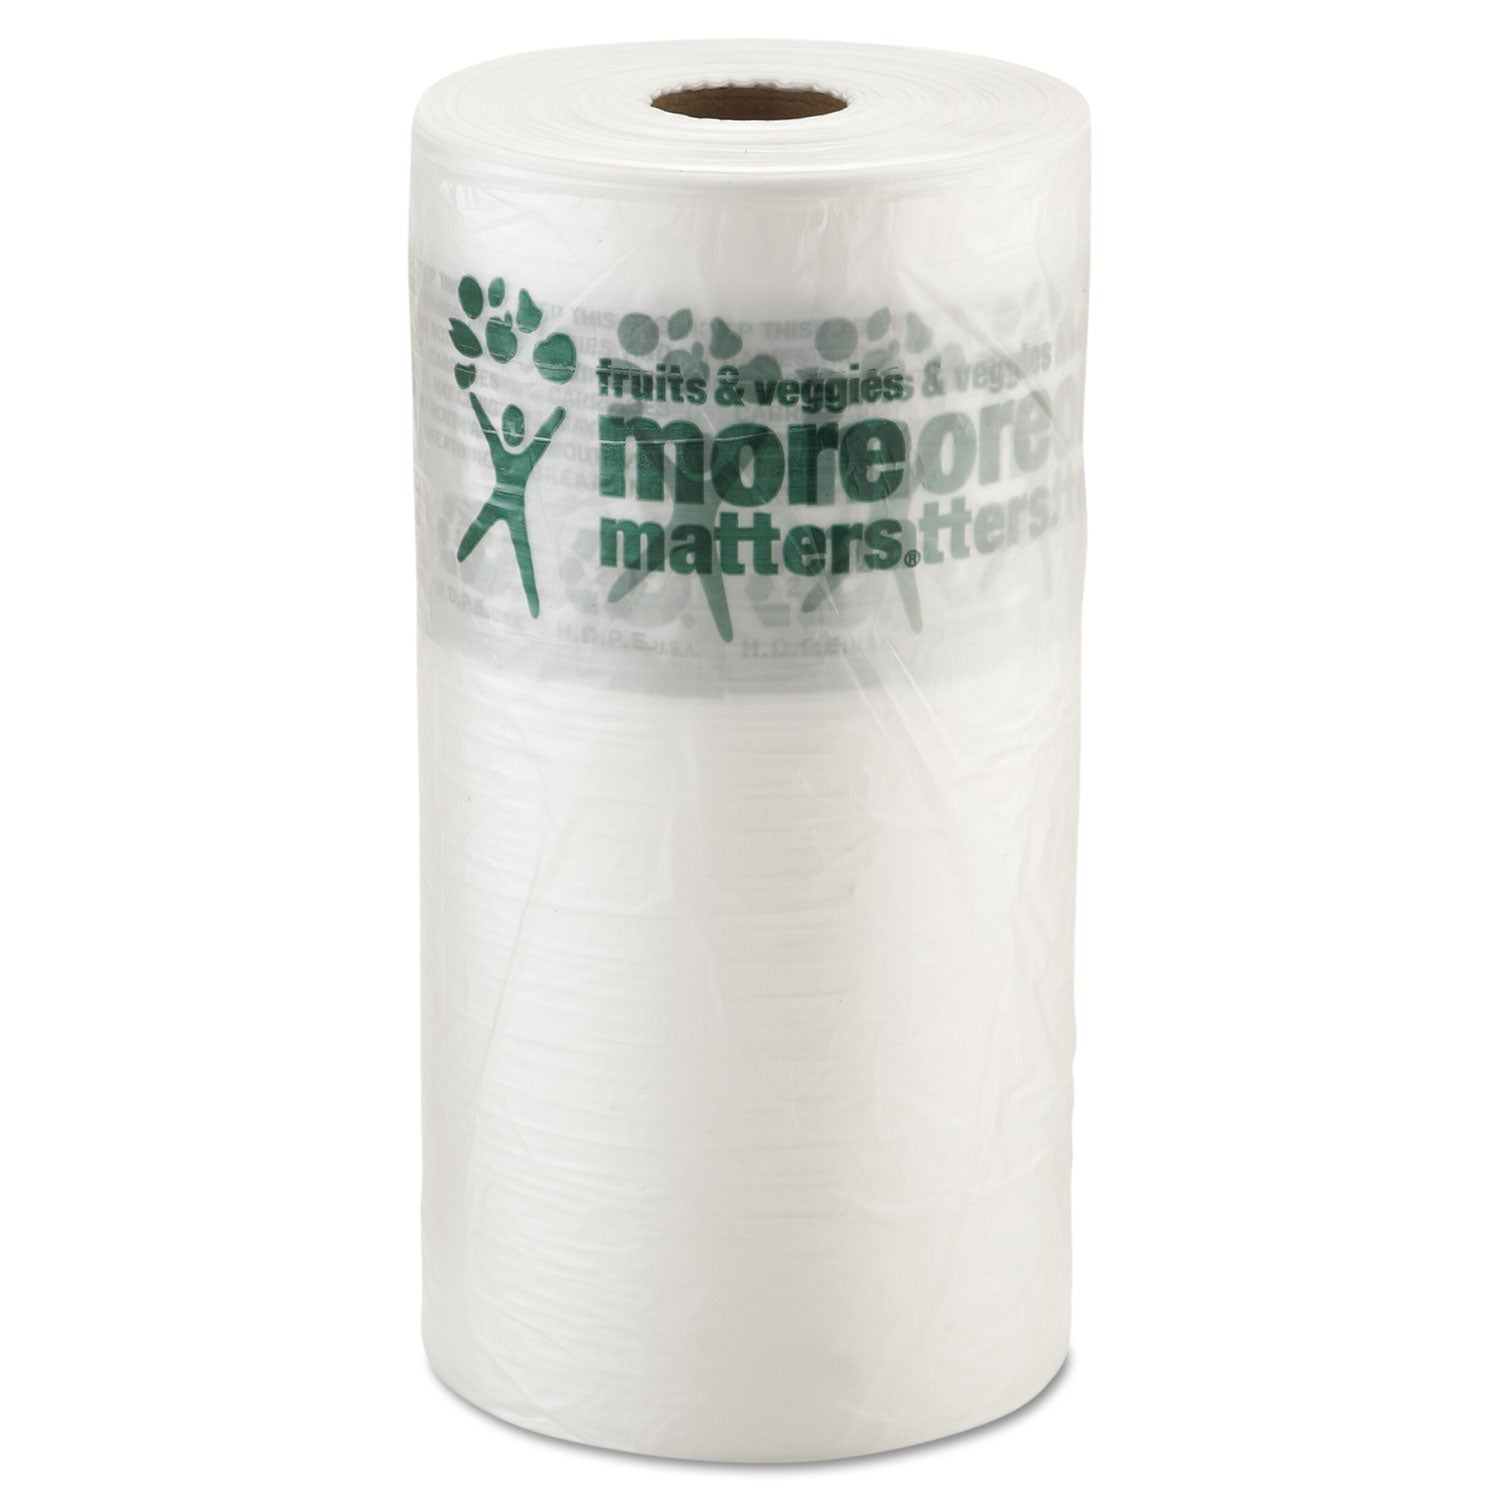 produce-bags-9-microns-10-x-15-clear-1400-bags-roll-4-rolls-carton_ibsphmore15ns - 1